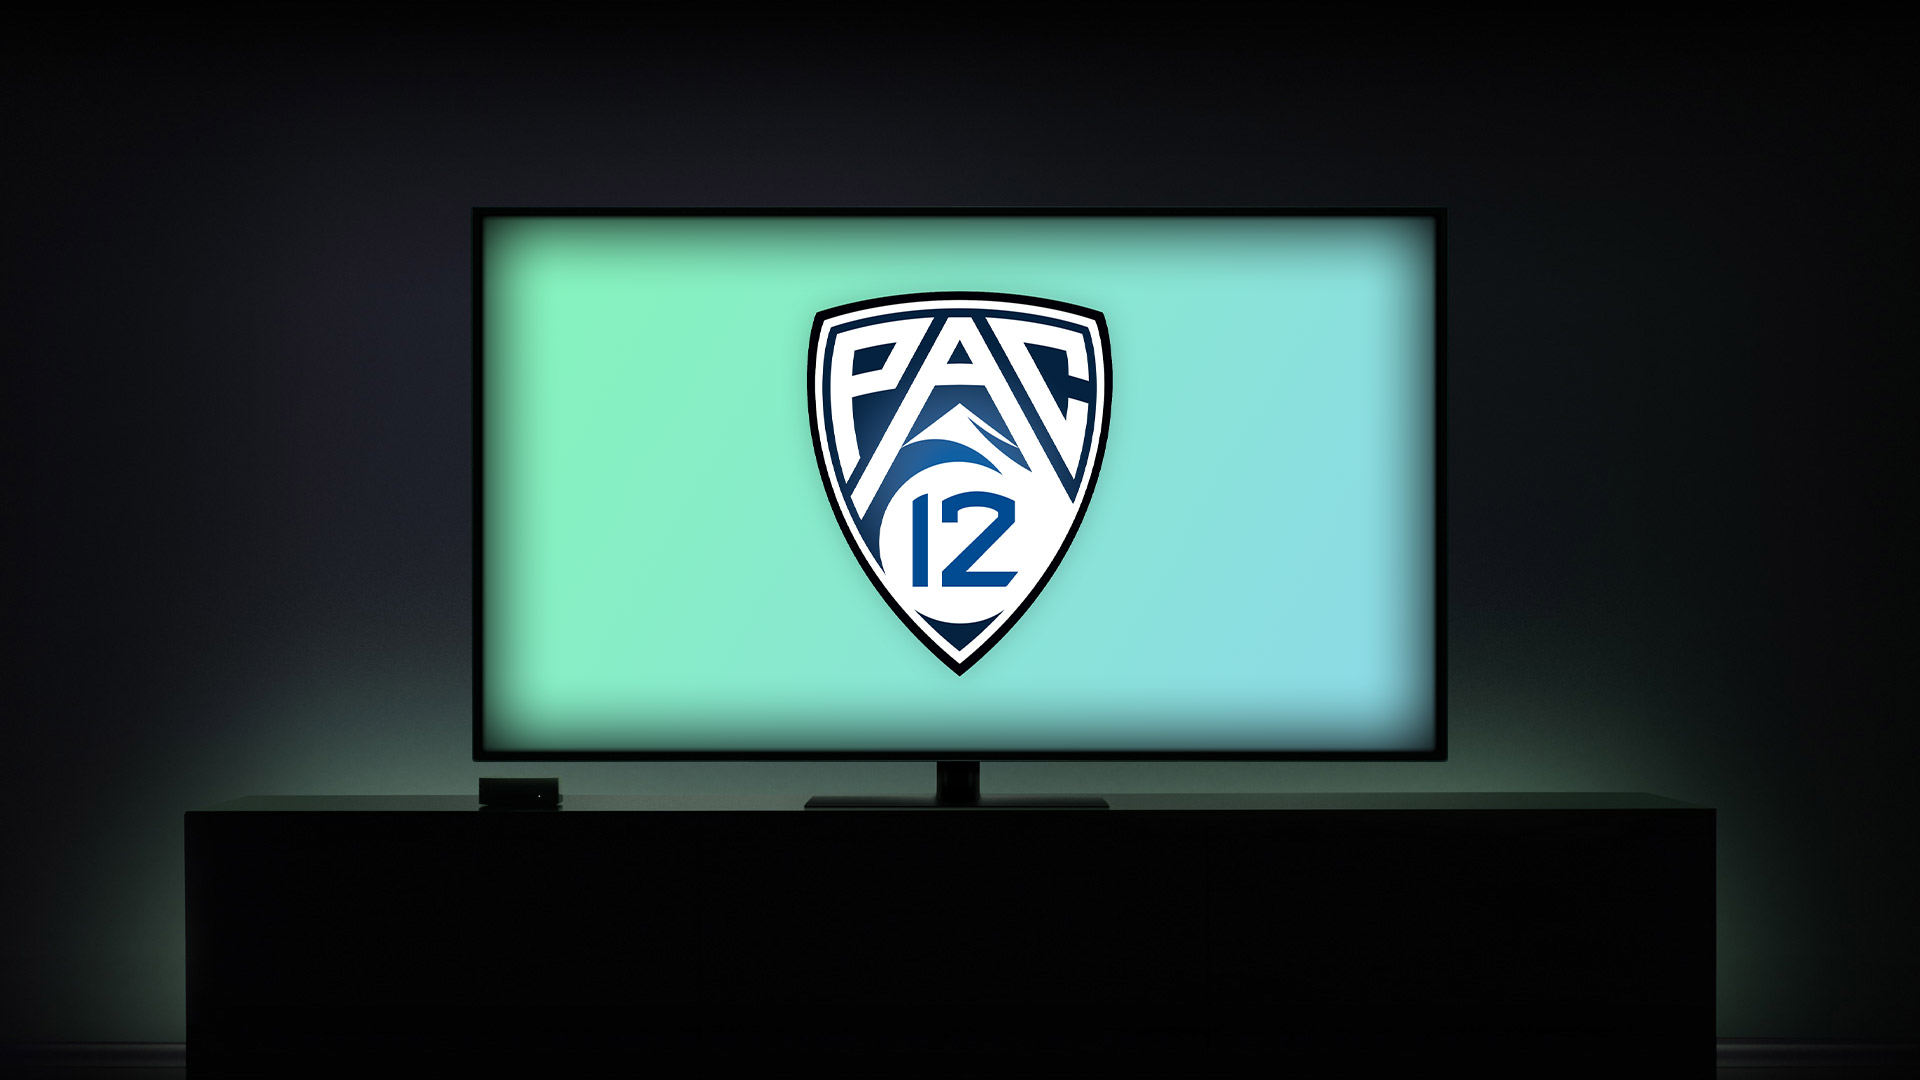 Apple TV is the frontrunner to land streaming deal for Pac-12 conference, similar structure to MLS Season Pass